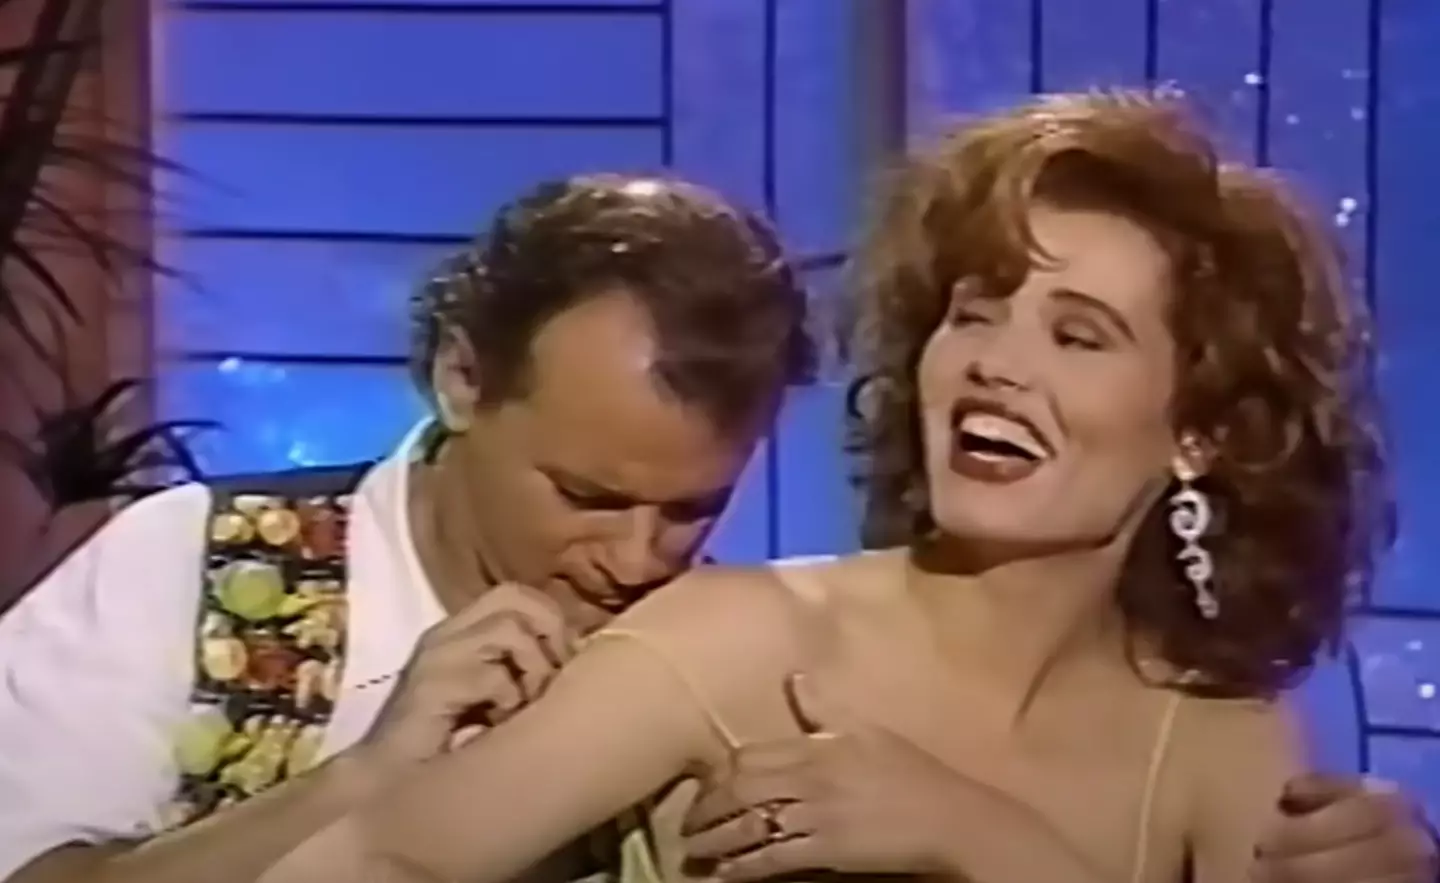 The pair's appearance on The Arsenio Hall Show saw Murray take down one of Davis' dress straps.